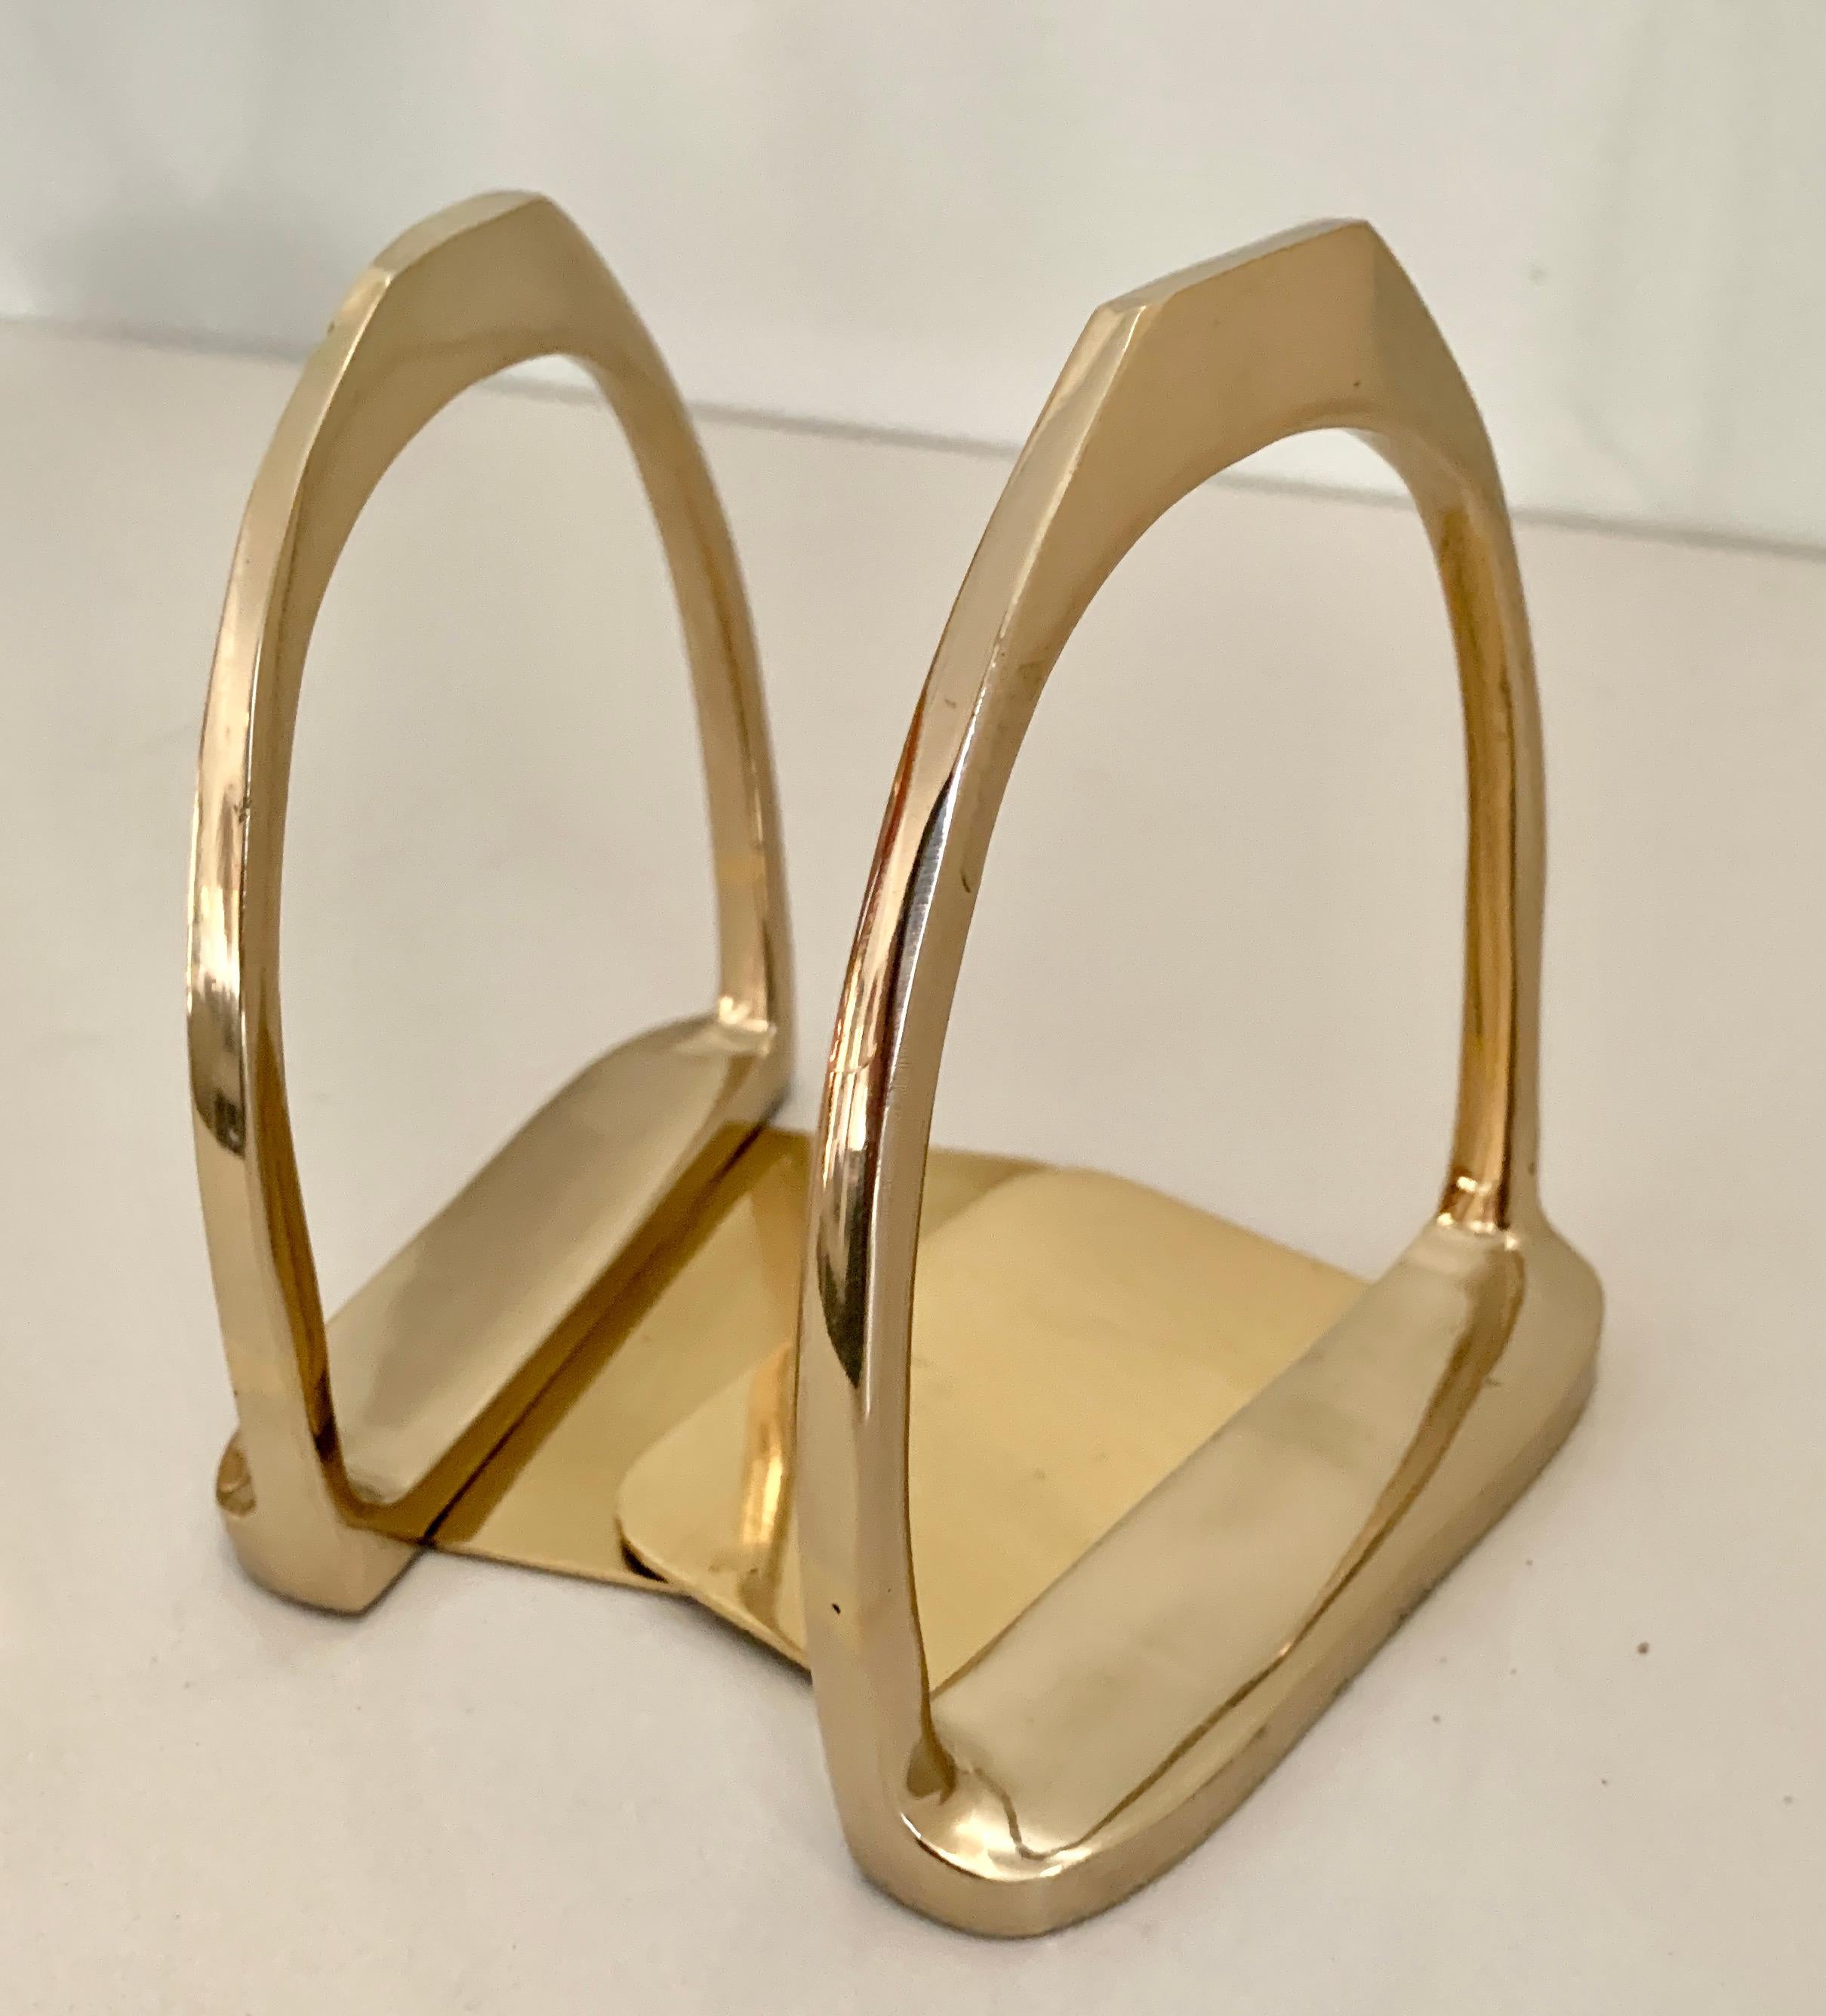 Mid-Century Modern Pair of Brass Horse Bit Bookends in the Style of Gucci